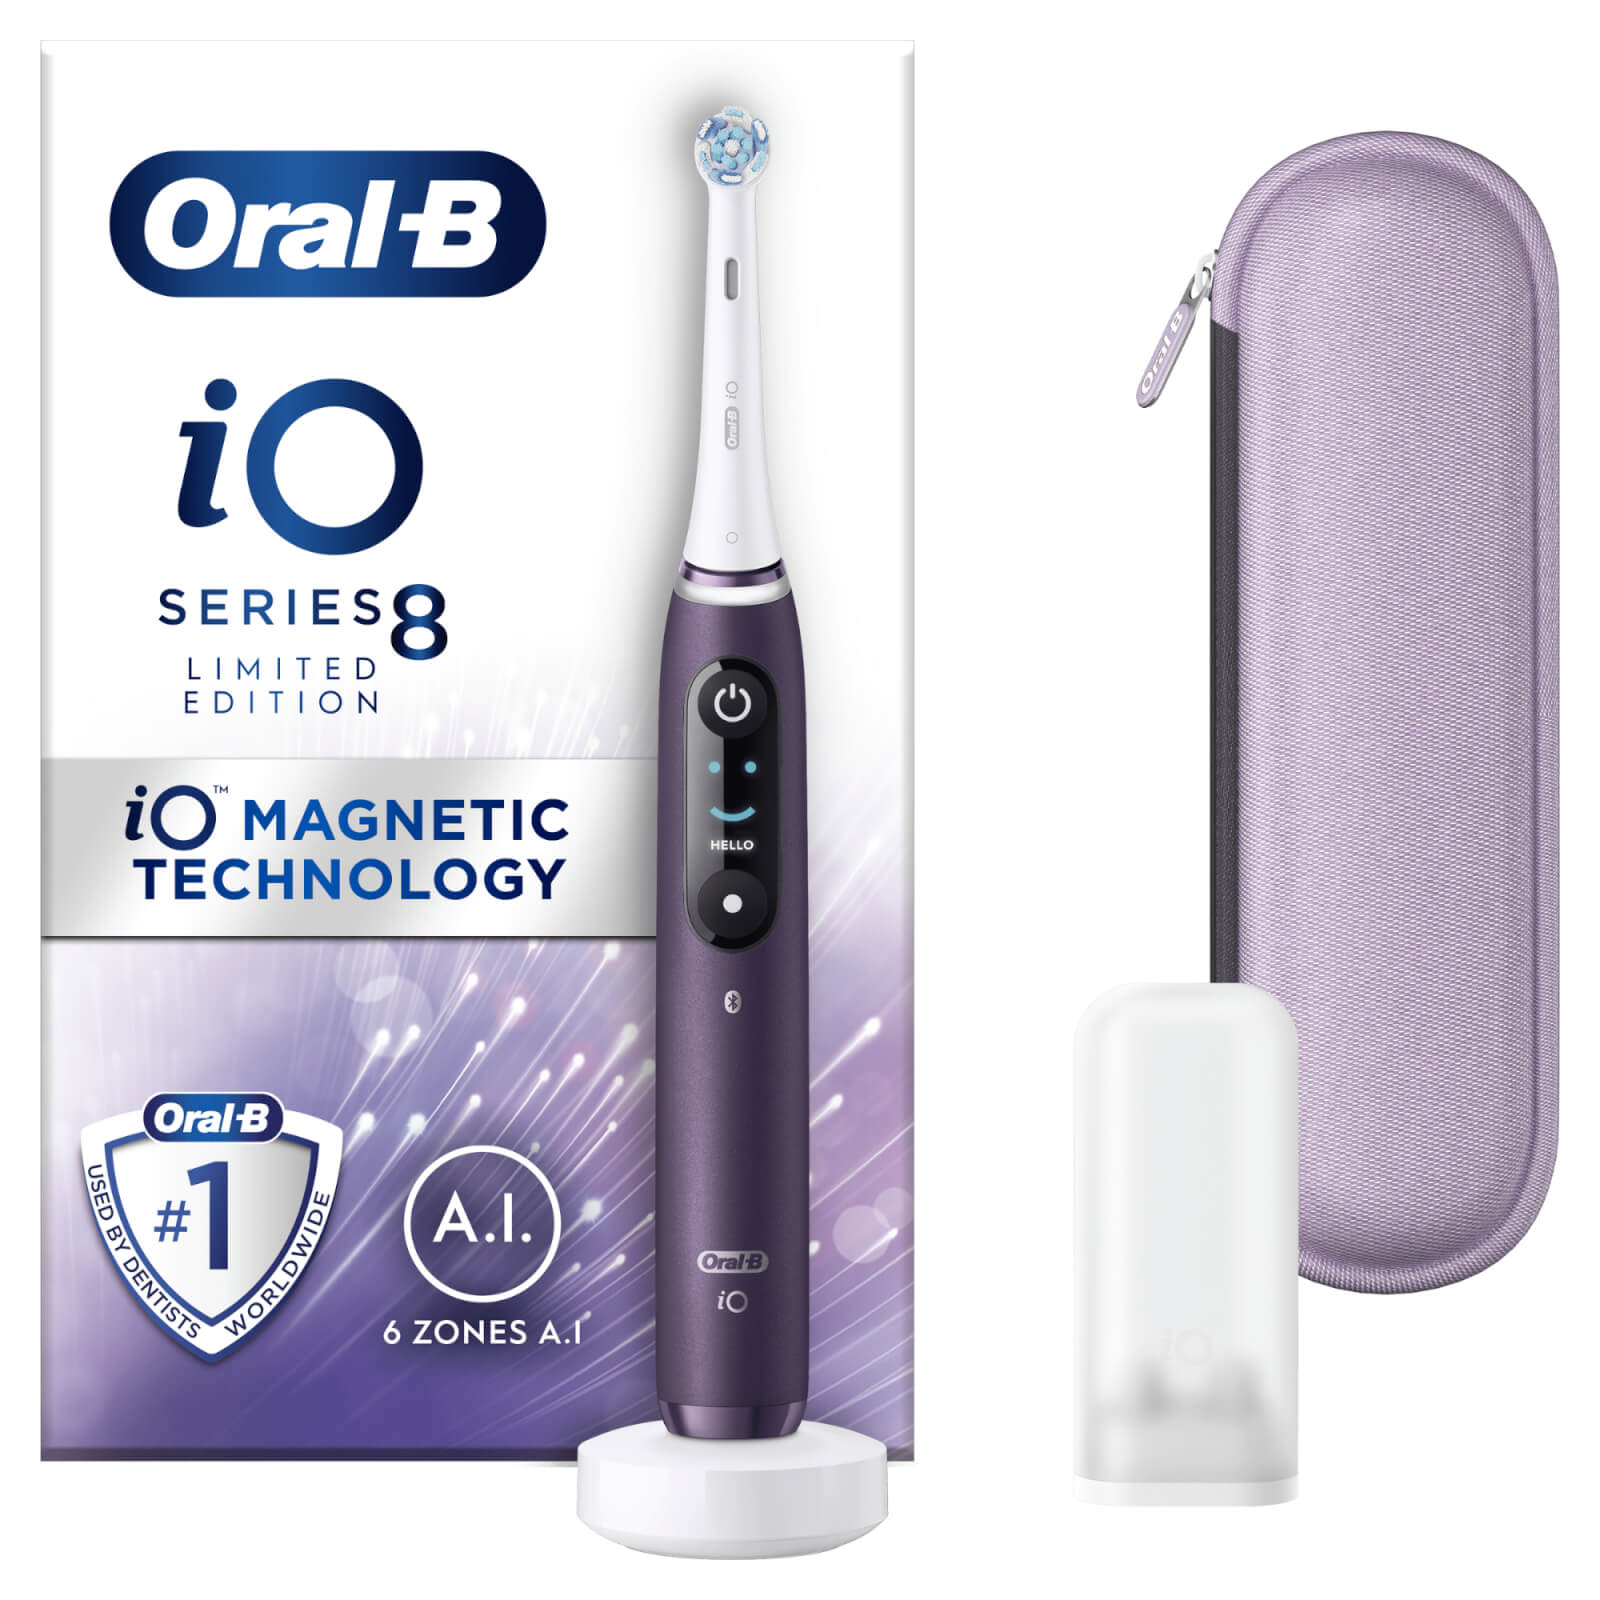 Oral B iO8 Violet Electric Toothbrush with Zipper Case - Toothbrush